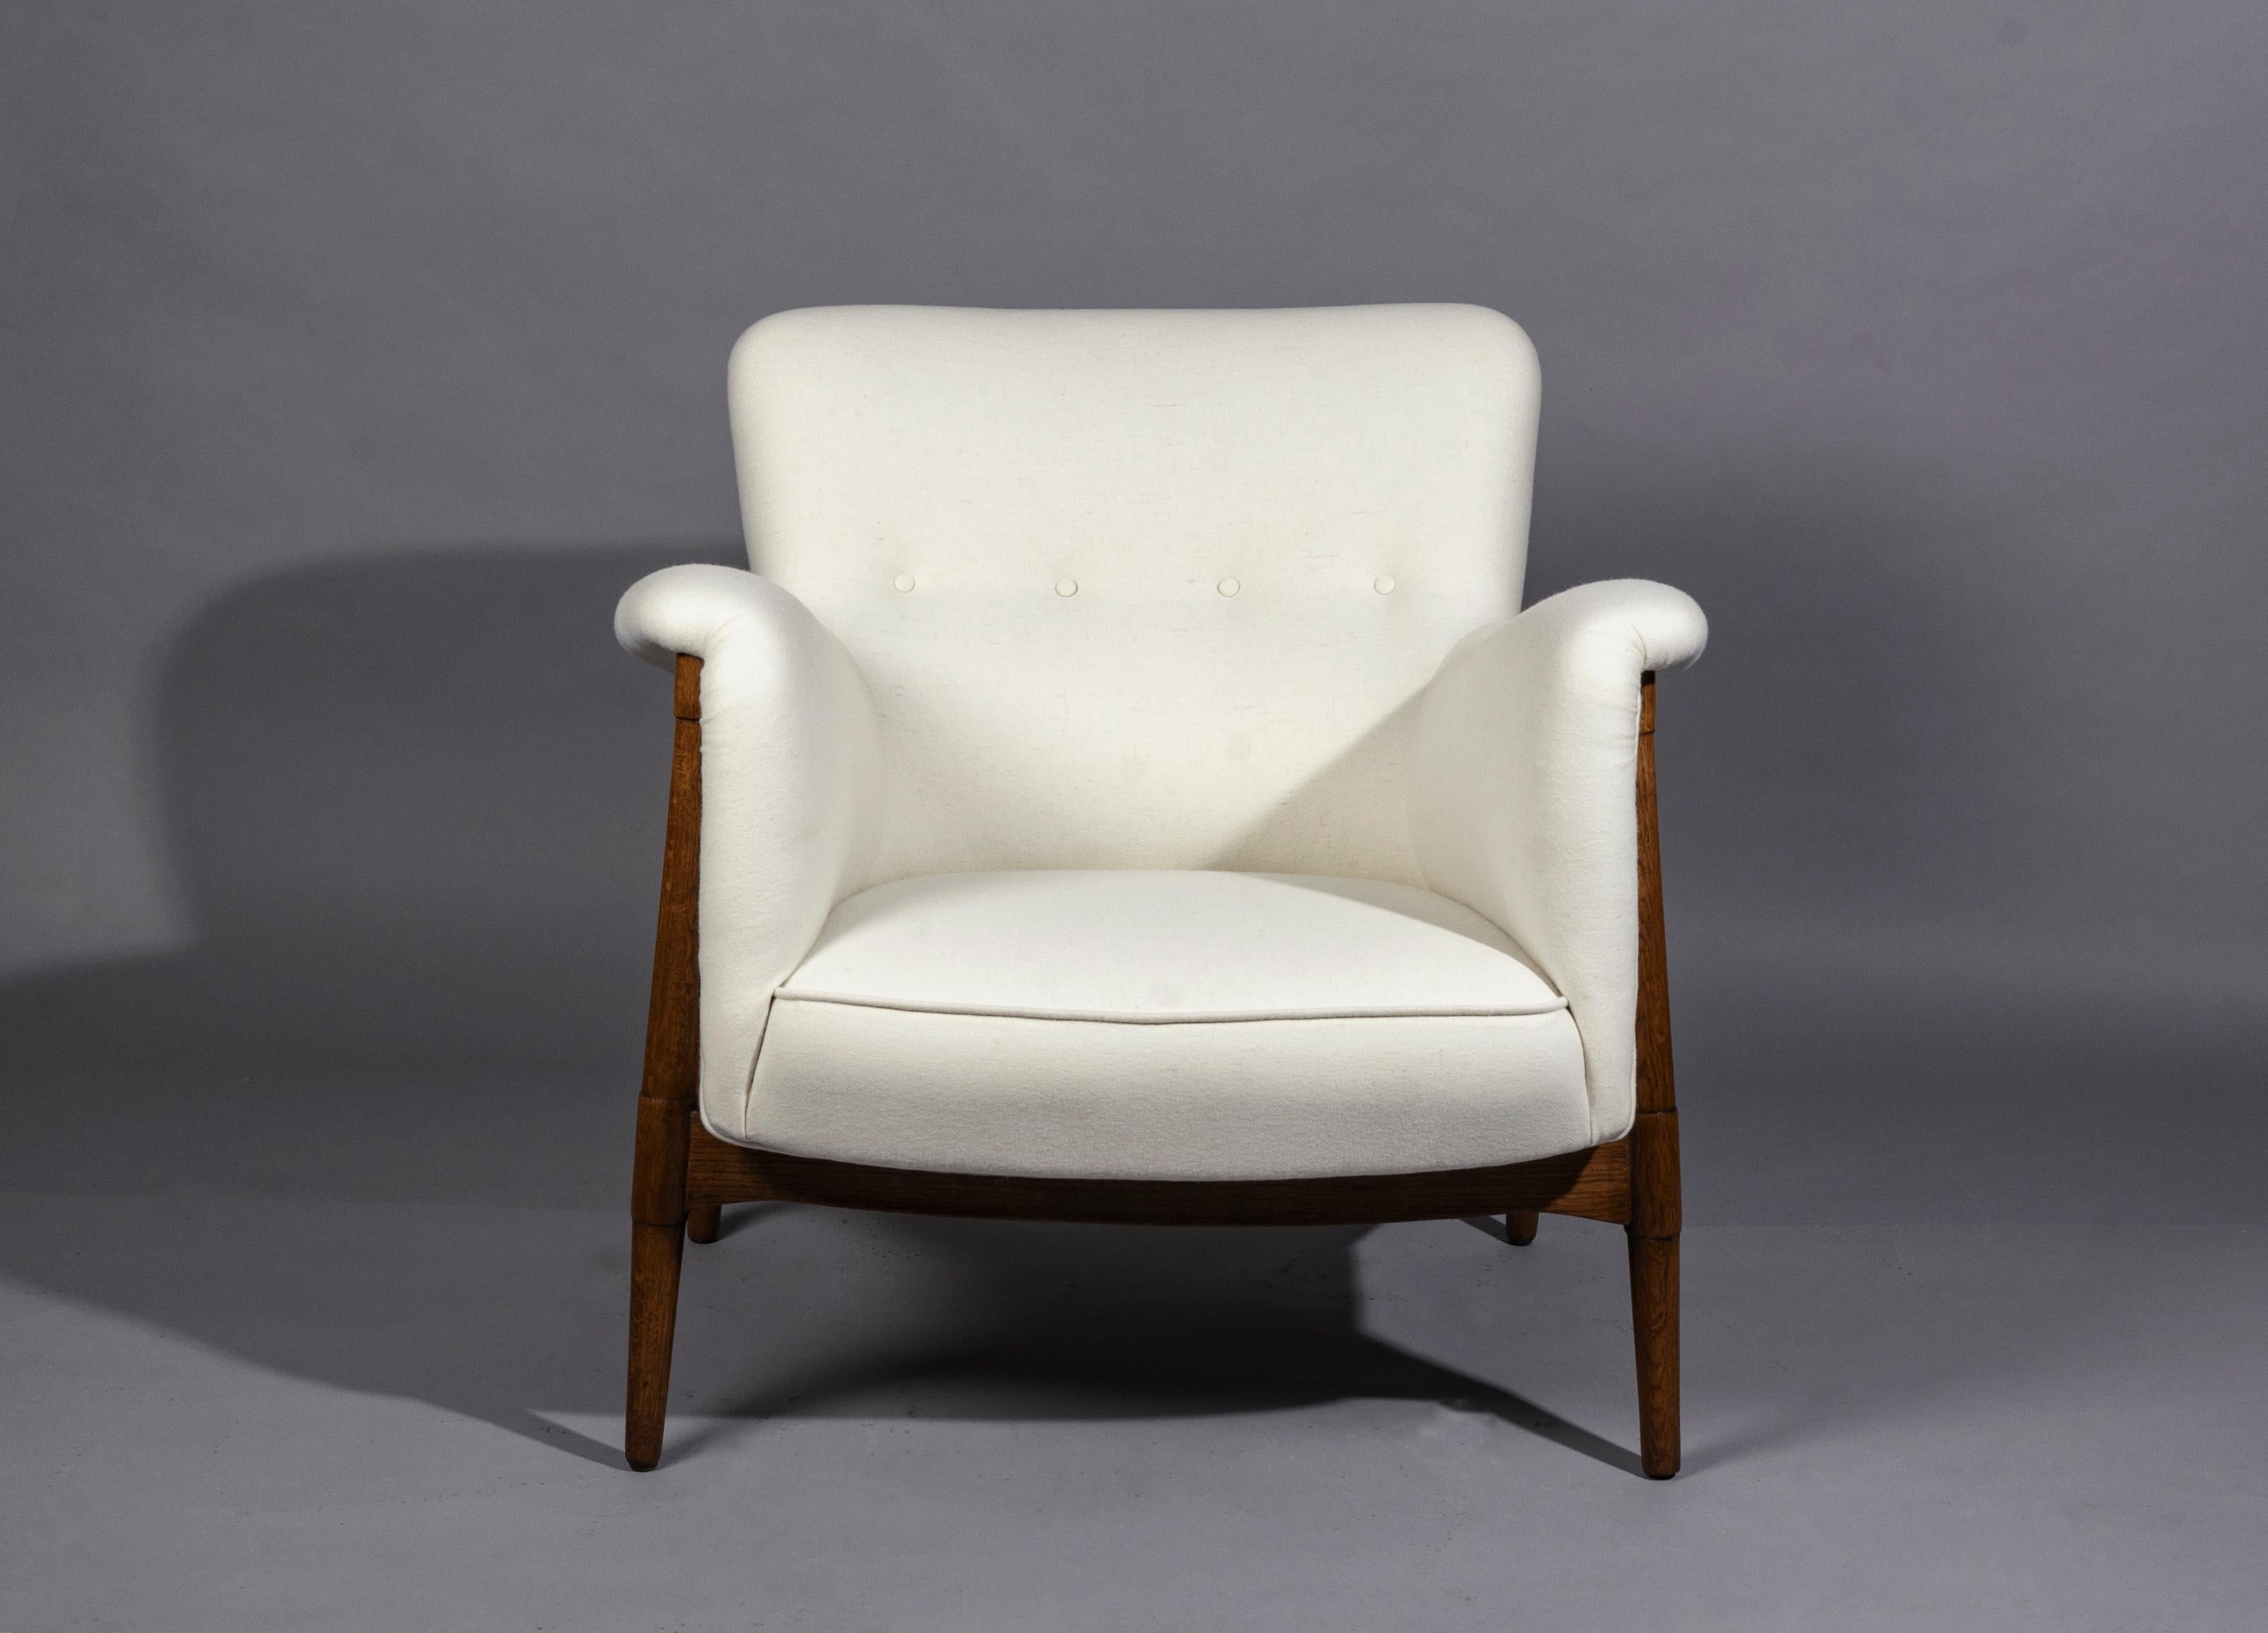 Ib Kofod-Larsen lounge chair, Denmark, 1950s. Newly waxed teak frame and upholstered in high quality Italian wool.